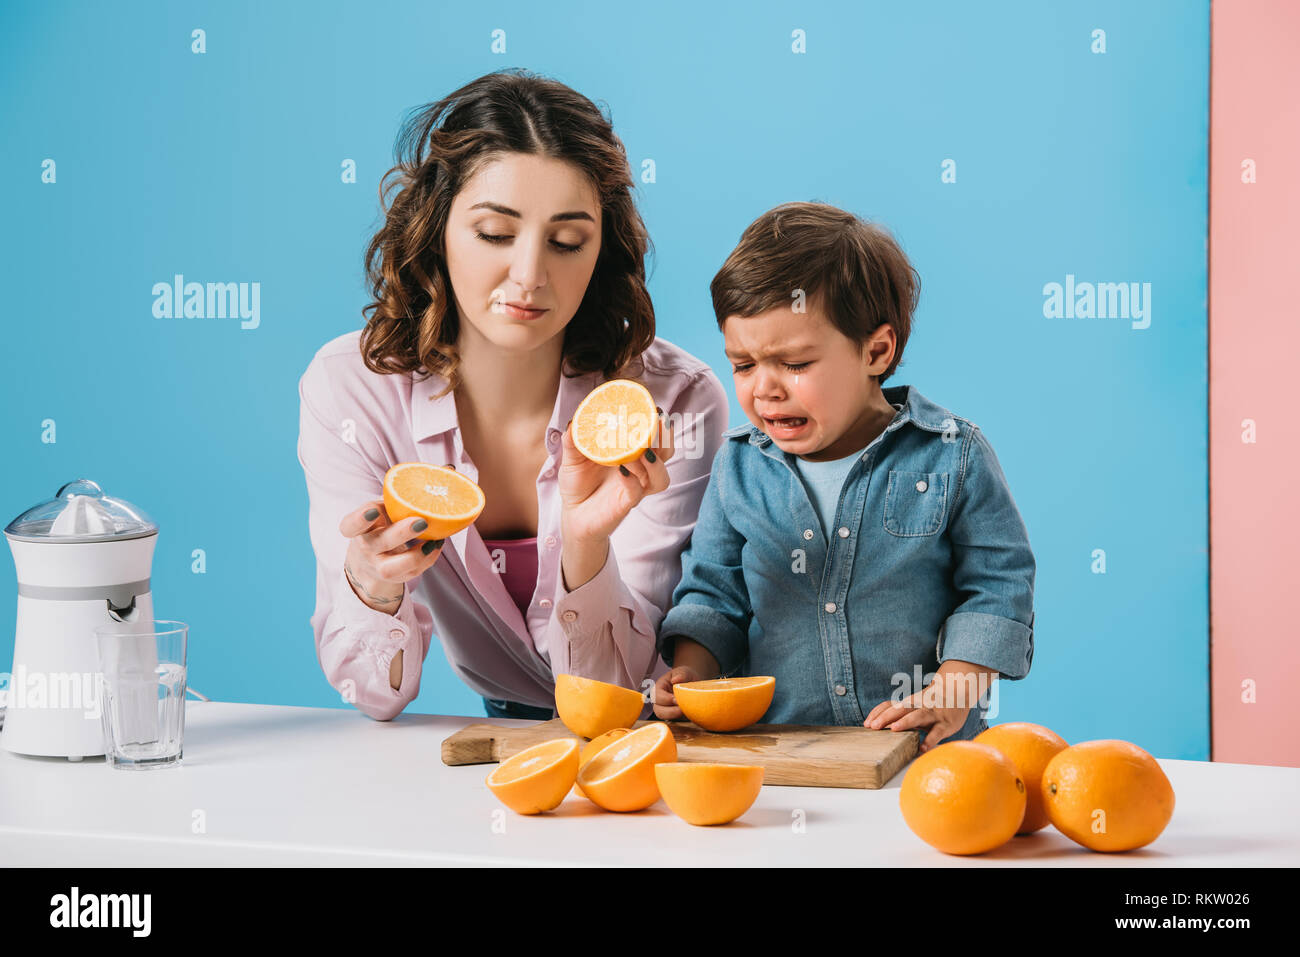 mother holding cut oranges and little son crying while standing at kitchen table on bicolor background Stock Photo